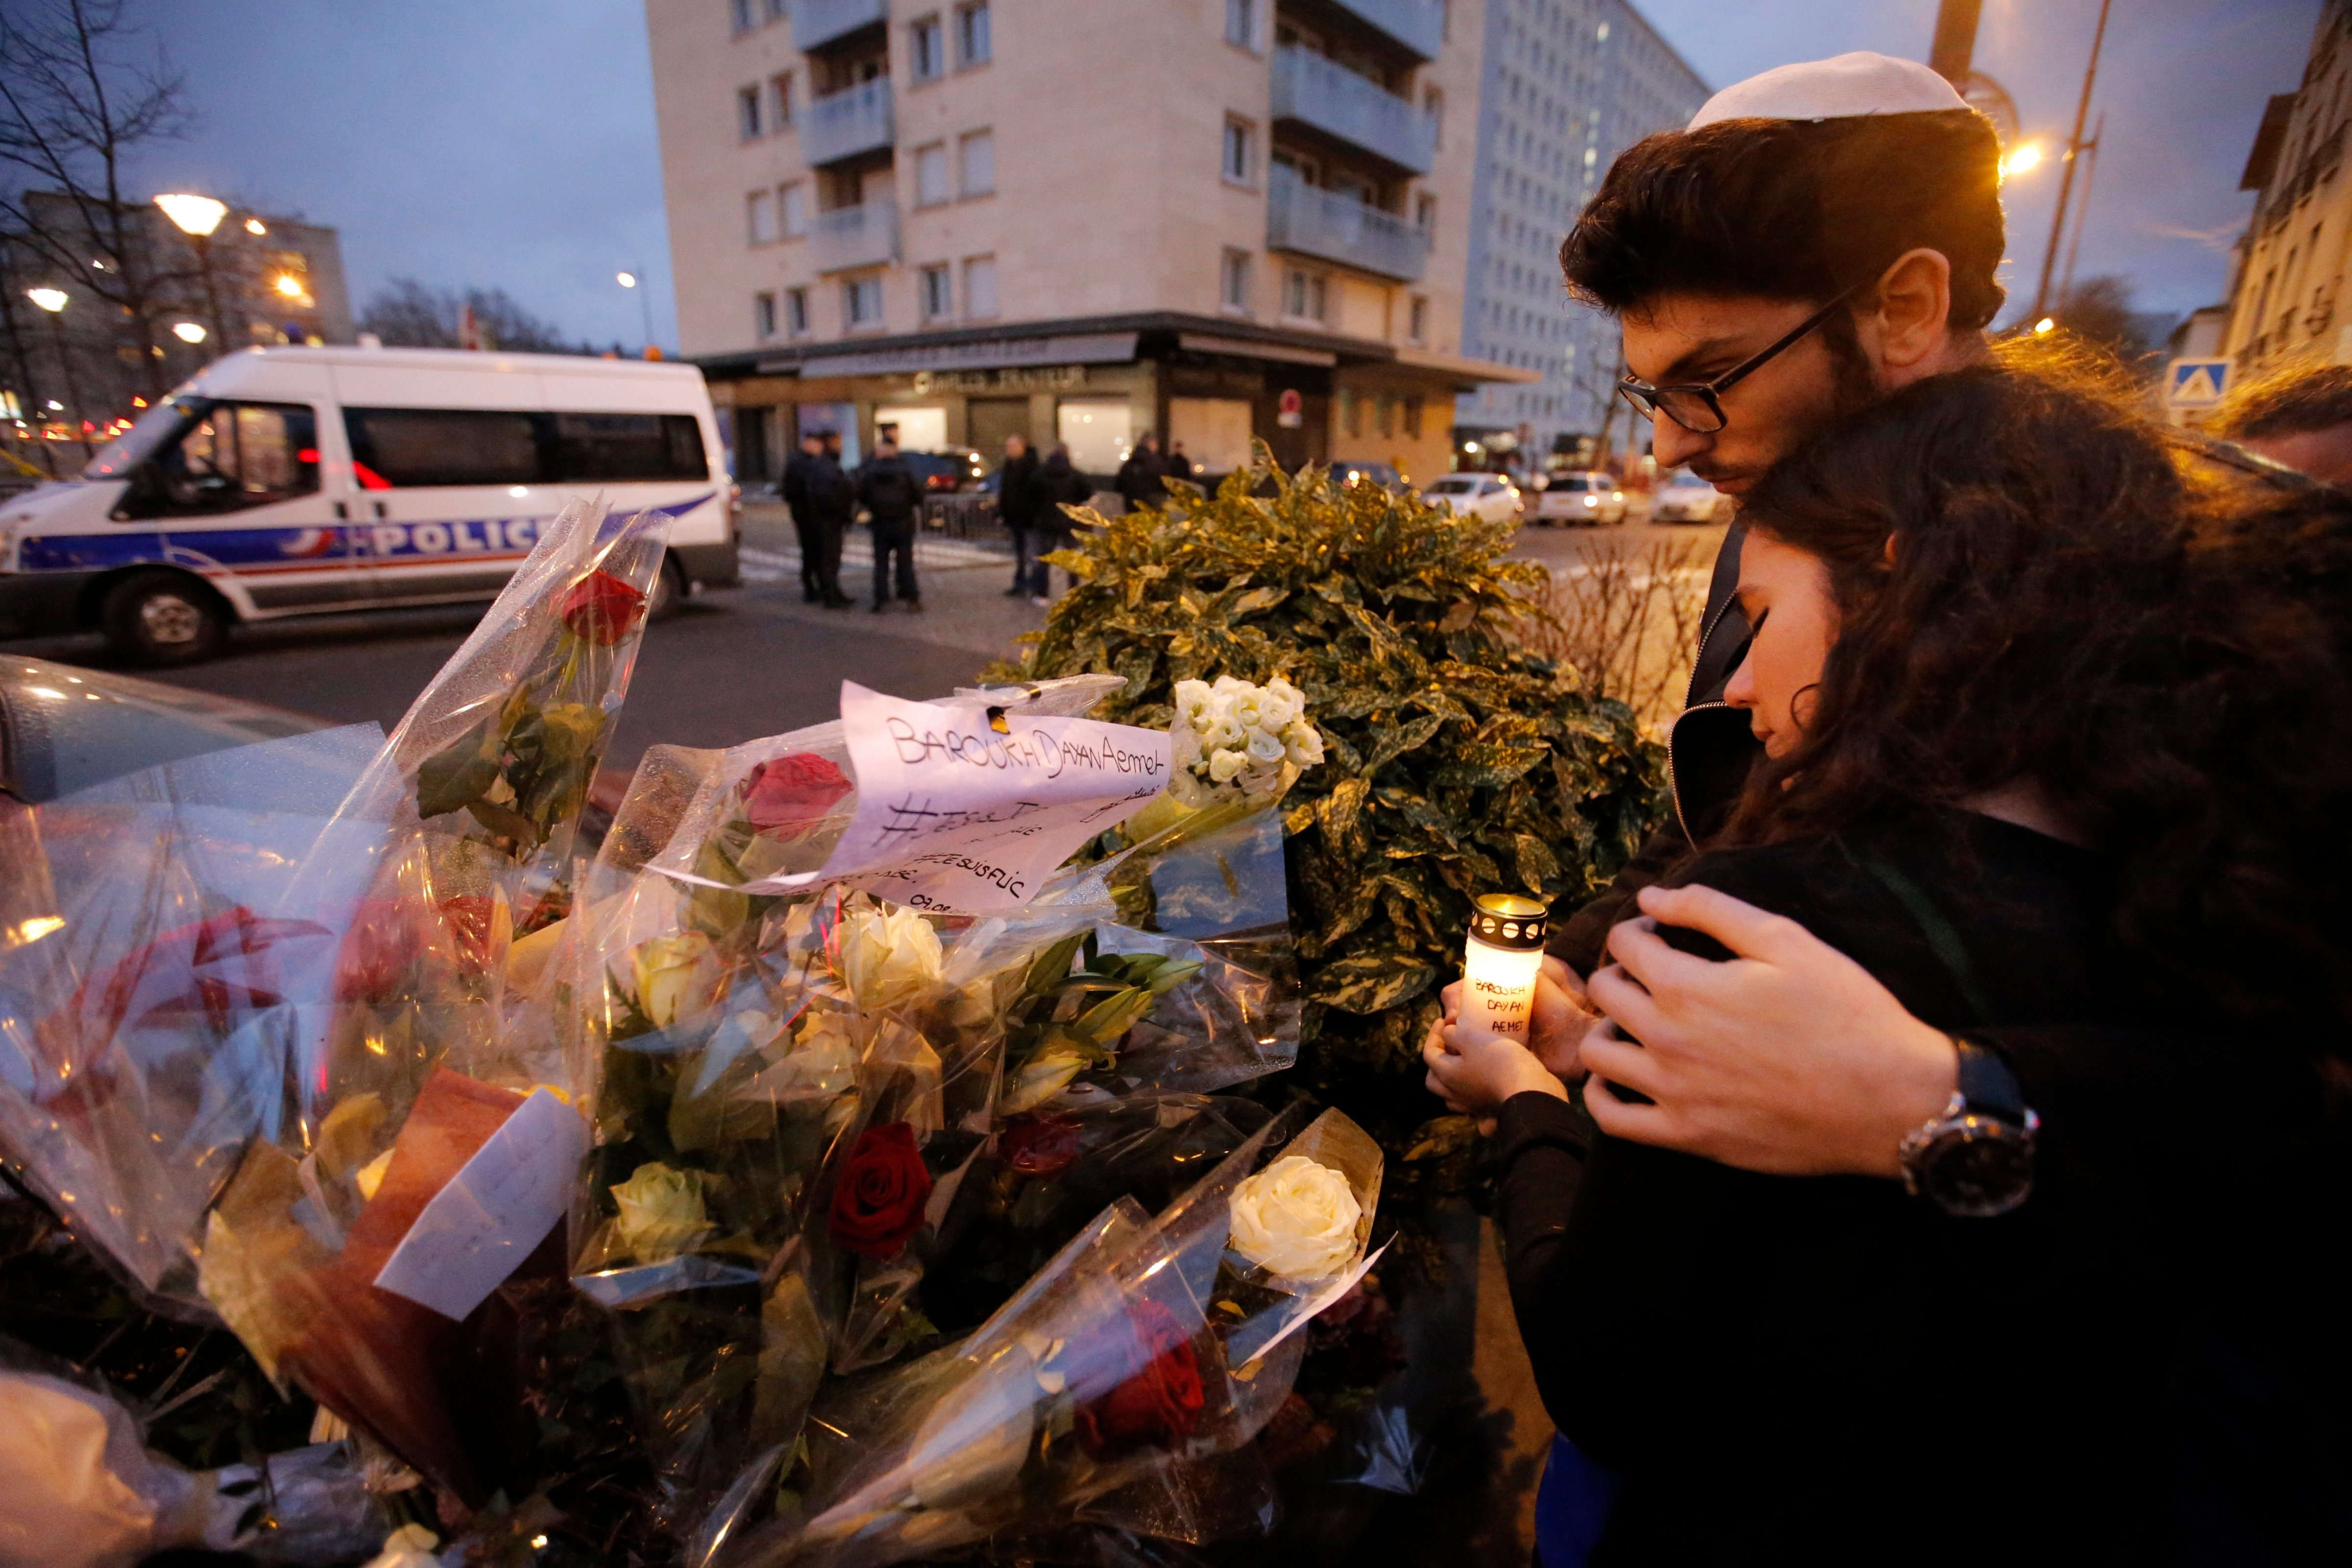 Esther Bekerman, 19, left, a cousin of one of the hostages, and Eliahou Rouas Cohen, 19, right, light a candle at a makeshift memorial near a kosher grocery store where four hostages were killed in Paris, Jan. 10, 2015. (Francois Mori—AP)